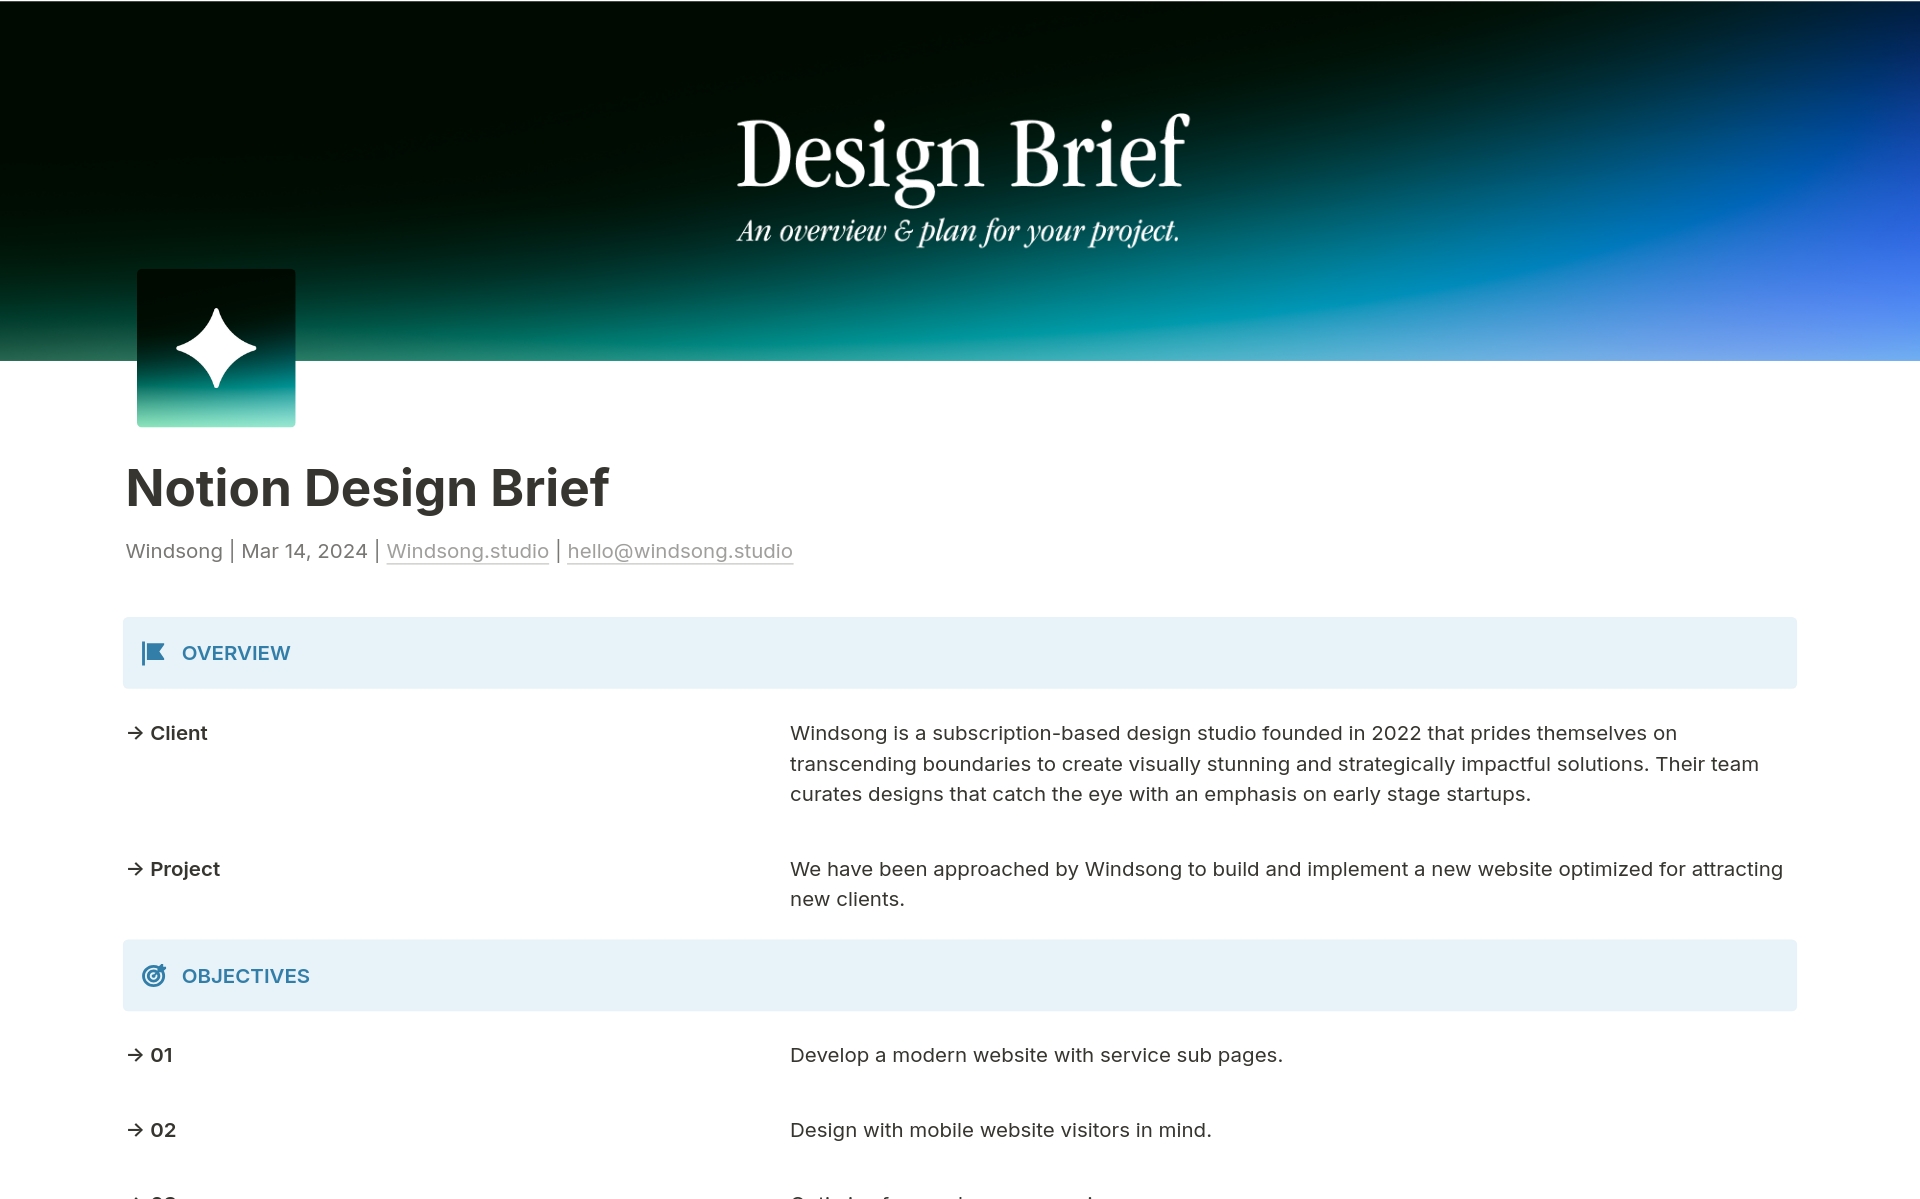 Create & Share Winning Design Briefs with Your Clients